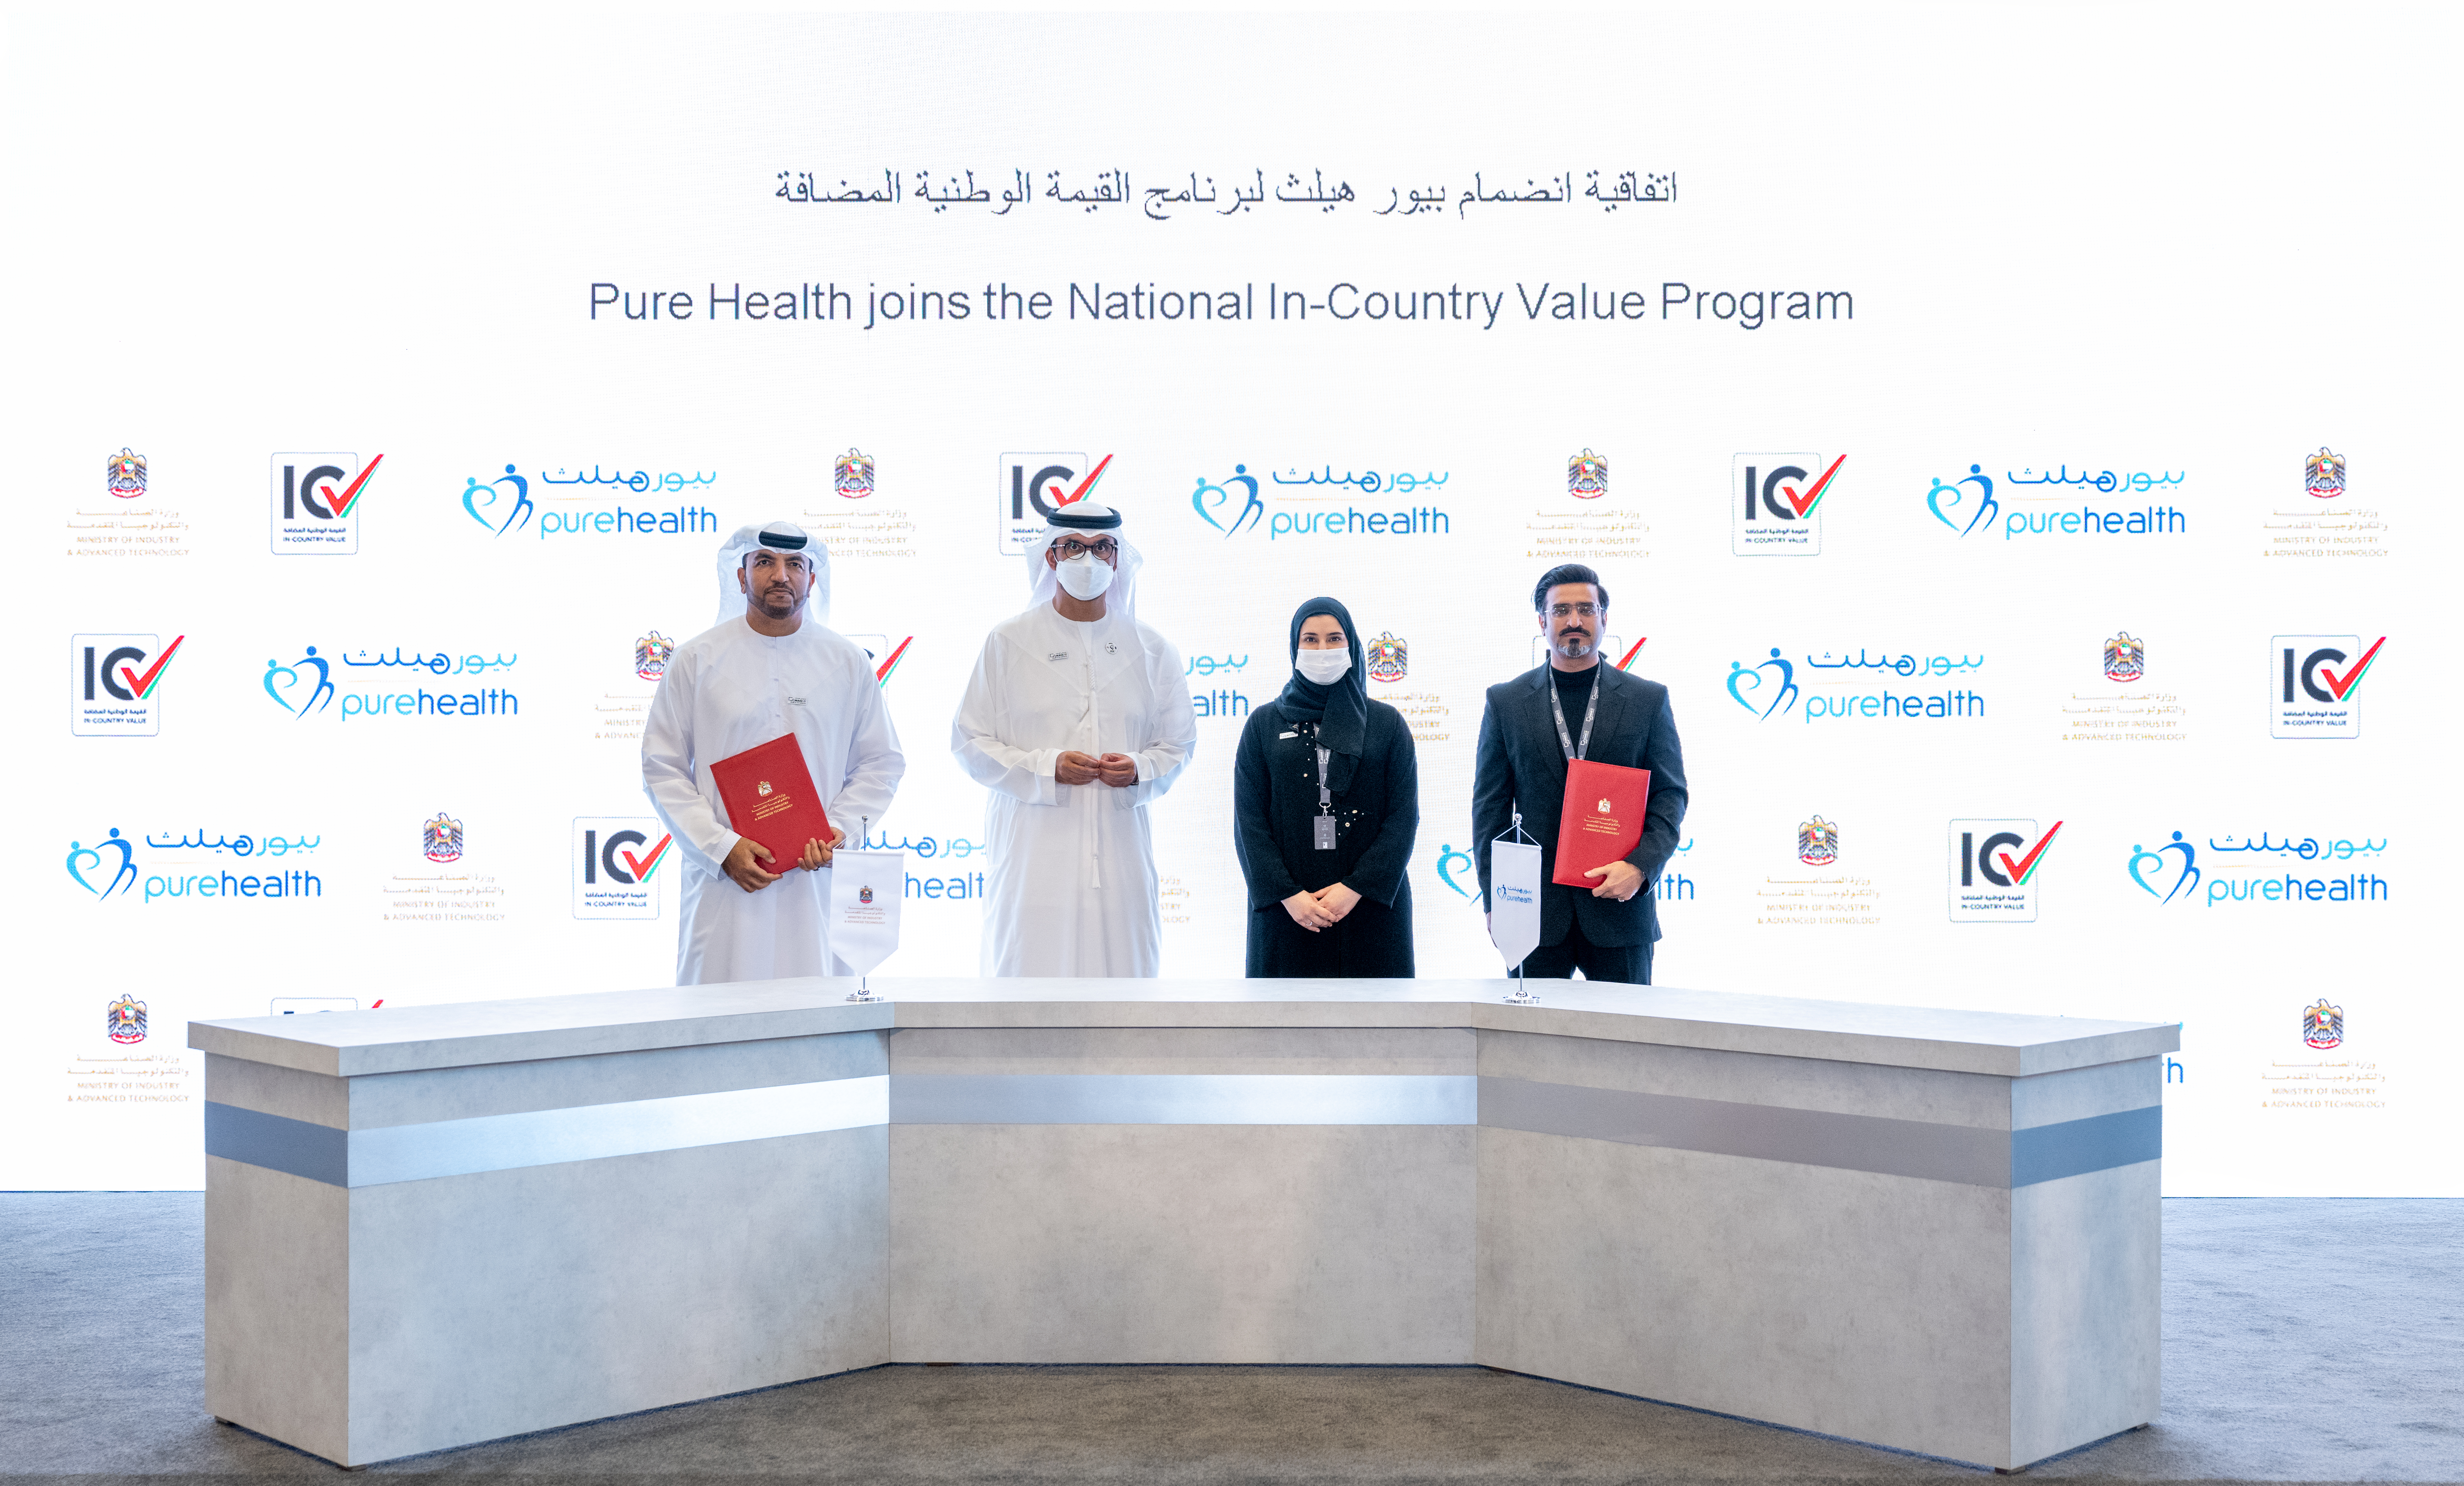 Pure Health joins National In-Country Value Program and signs agreement with MoIAT 